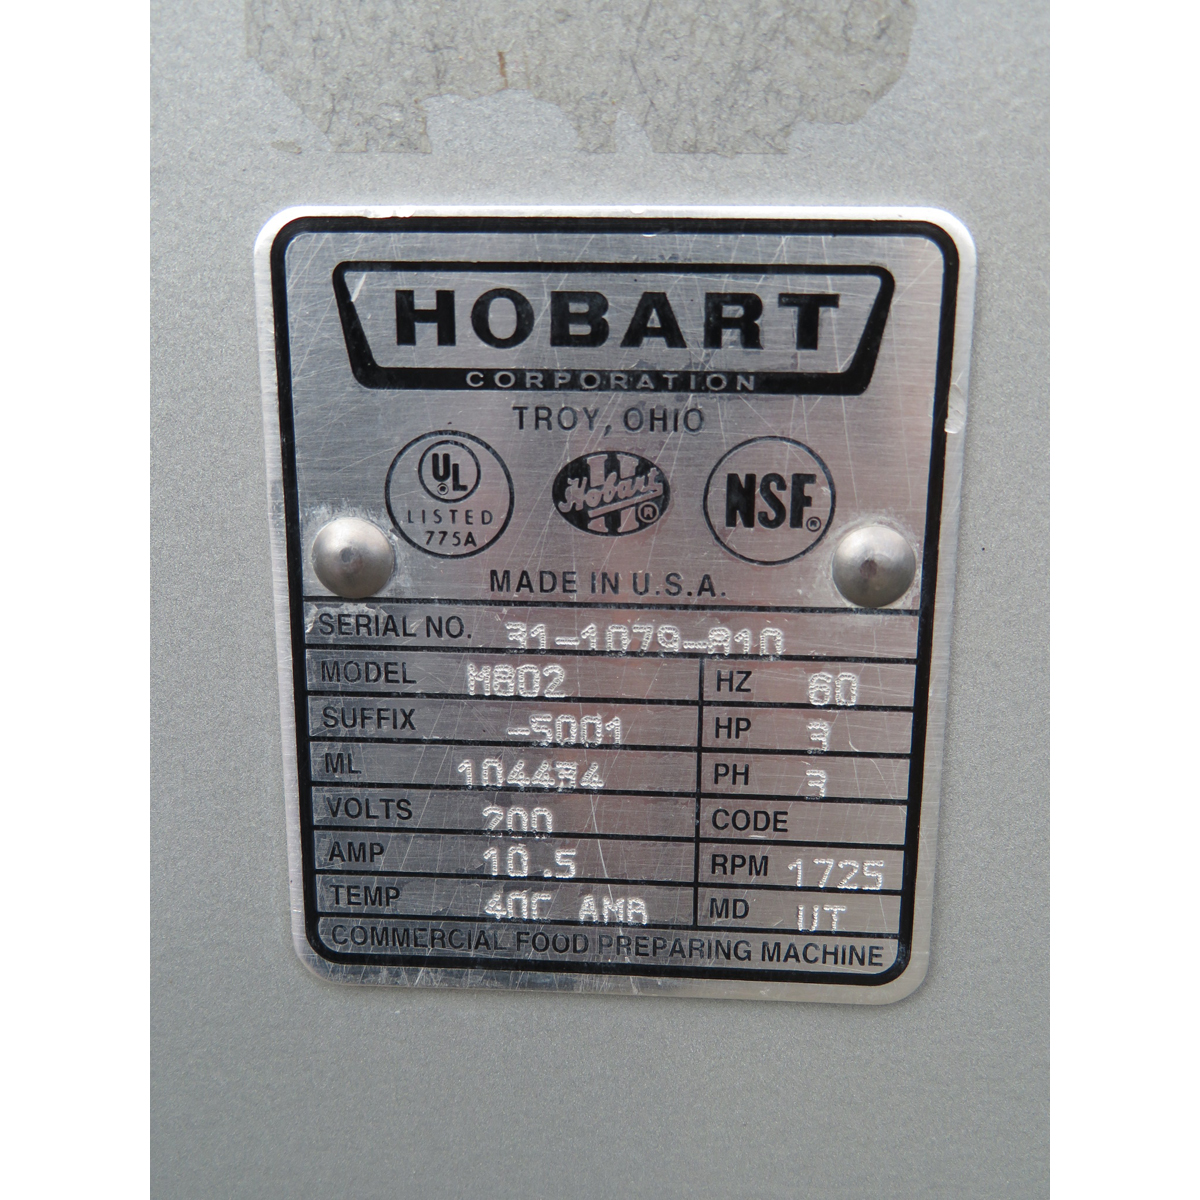 Hobart 80 Quart M802 Mixer with Safety Guard, Used Excellent Condition image 4